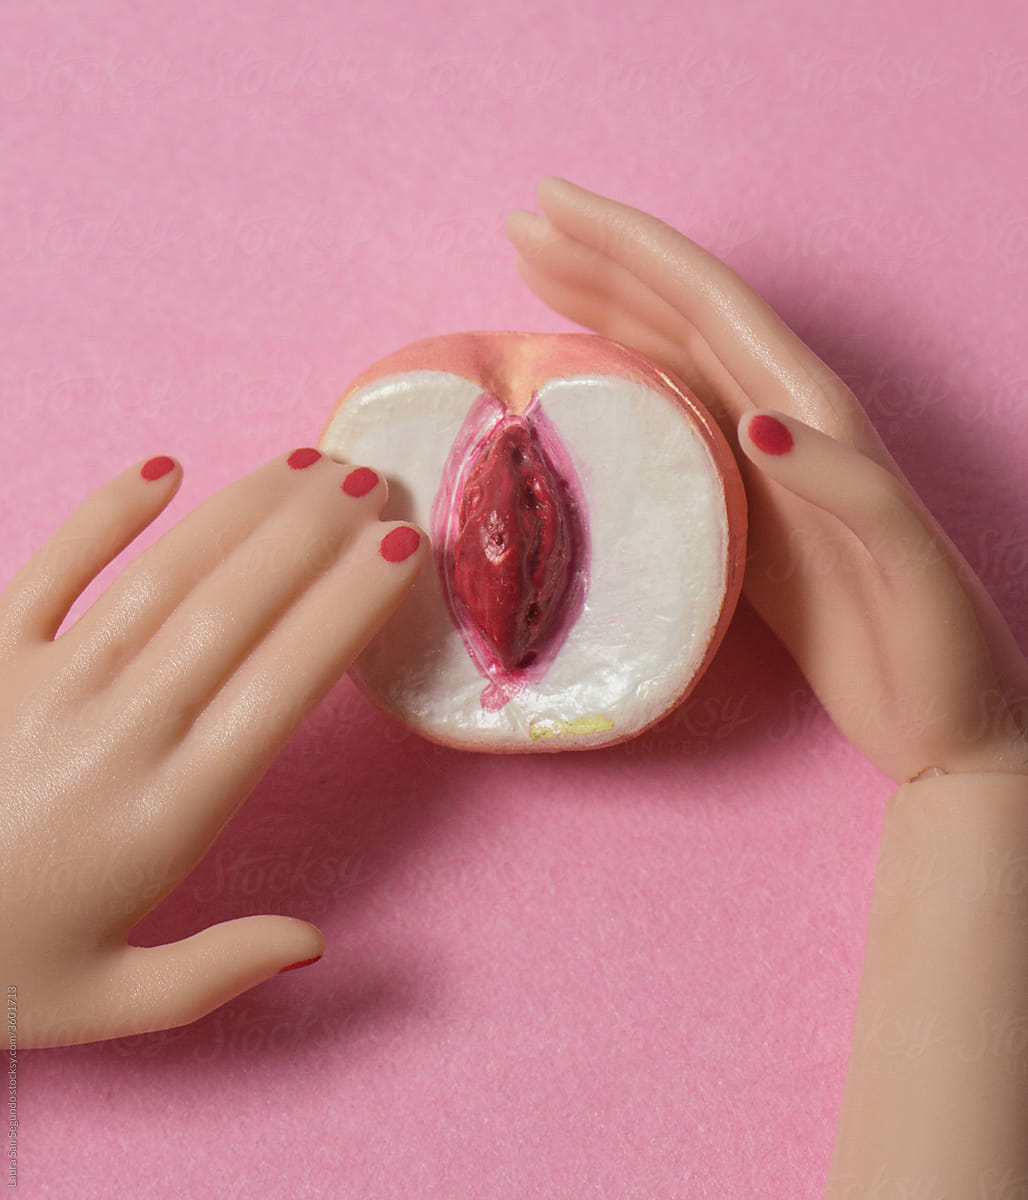 Doll plastic hands with red nails touching an open pink peach.